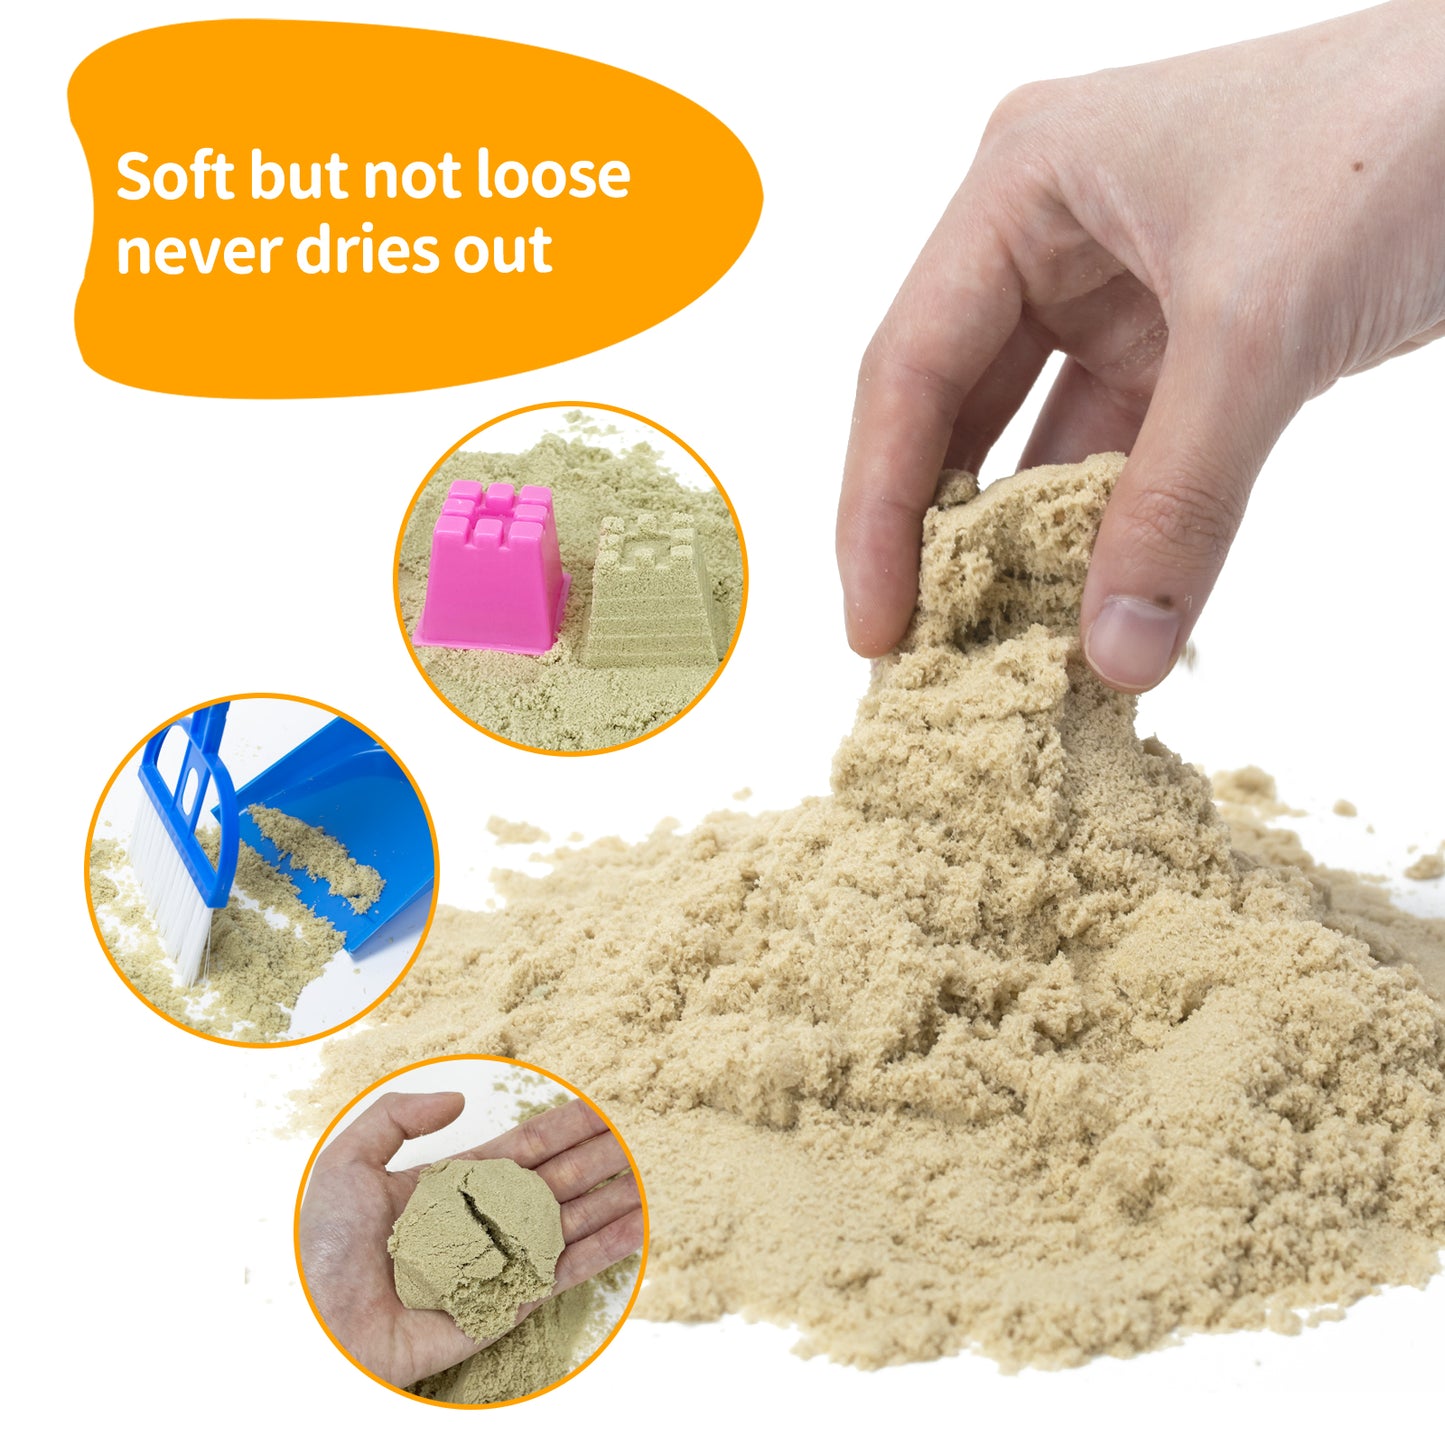 Construction Sand Toys, Kids Play Sand Kit Included 2.2lbs Magic Sand, Crane, 6 Construction Vehicles, 8 Signs, 12 Molds, Beach Building Sand Castle Sensory Bin Toy for Toddlers Boys